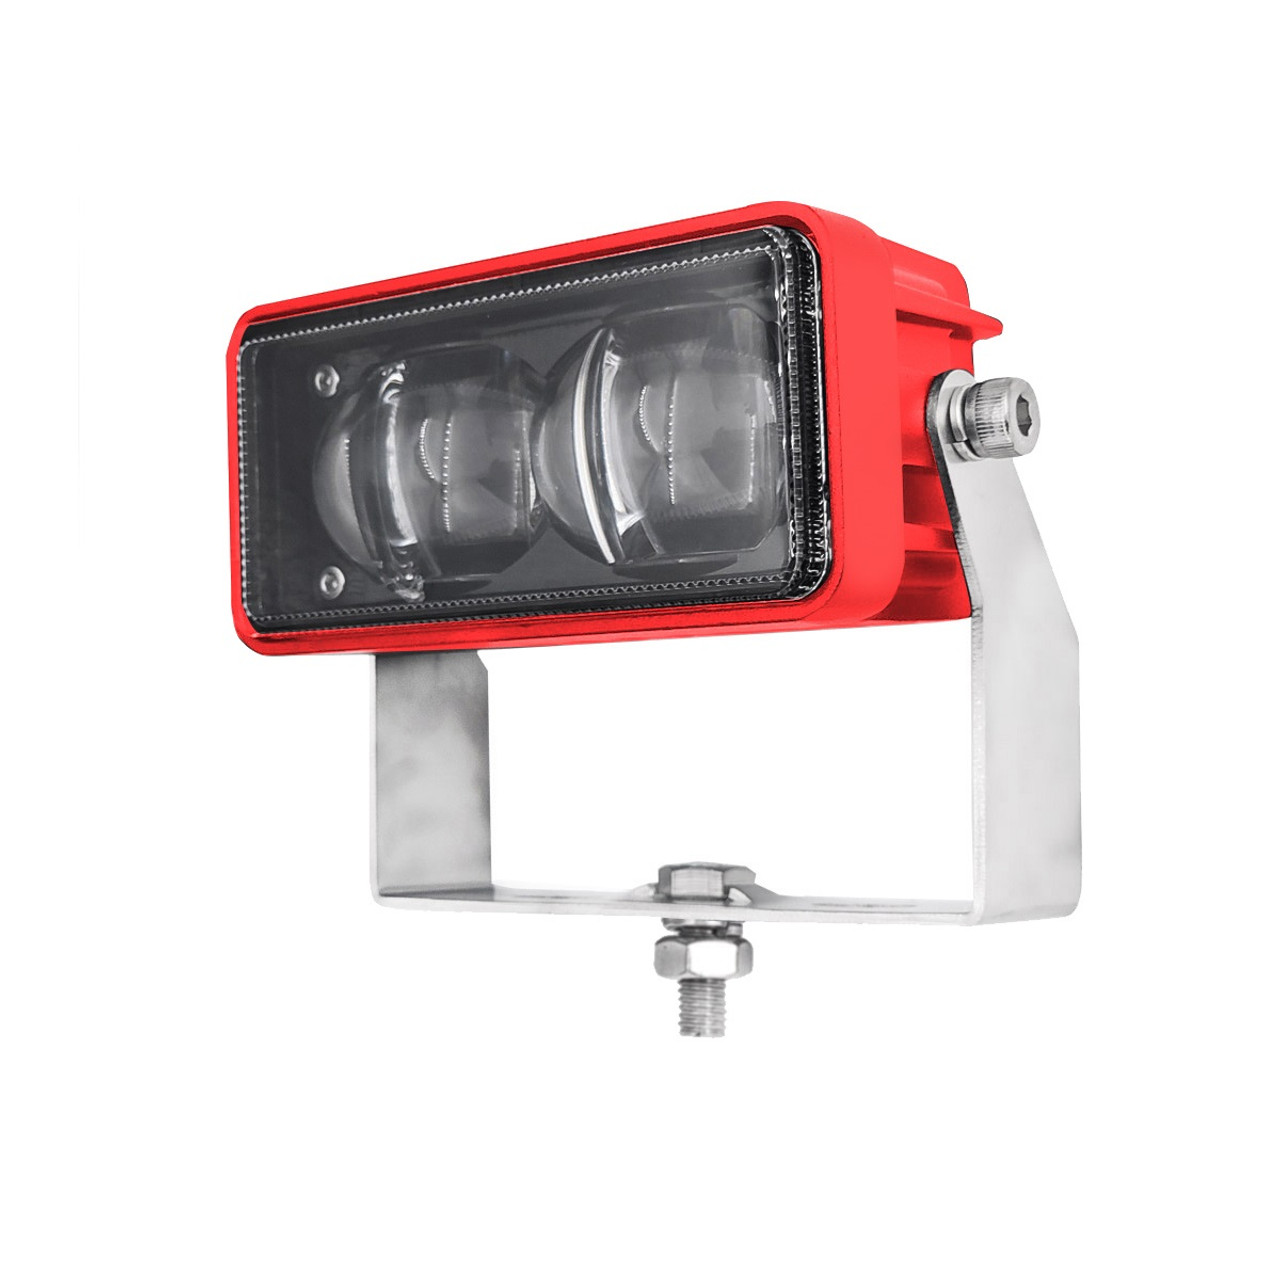 New 30 watt Workplace Safety Halo Systems with Smart Technology  by Ultimate LED Australia
The brightest performing red line light on the market